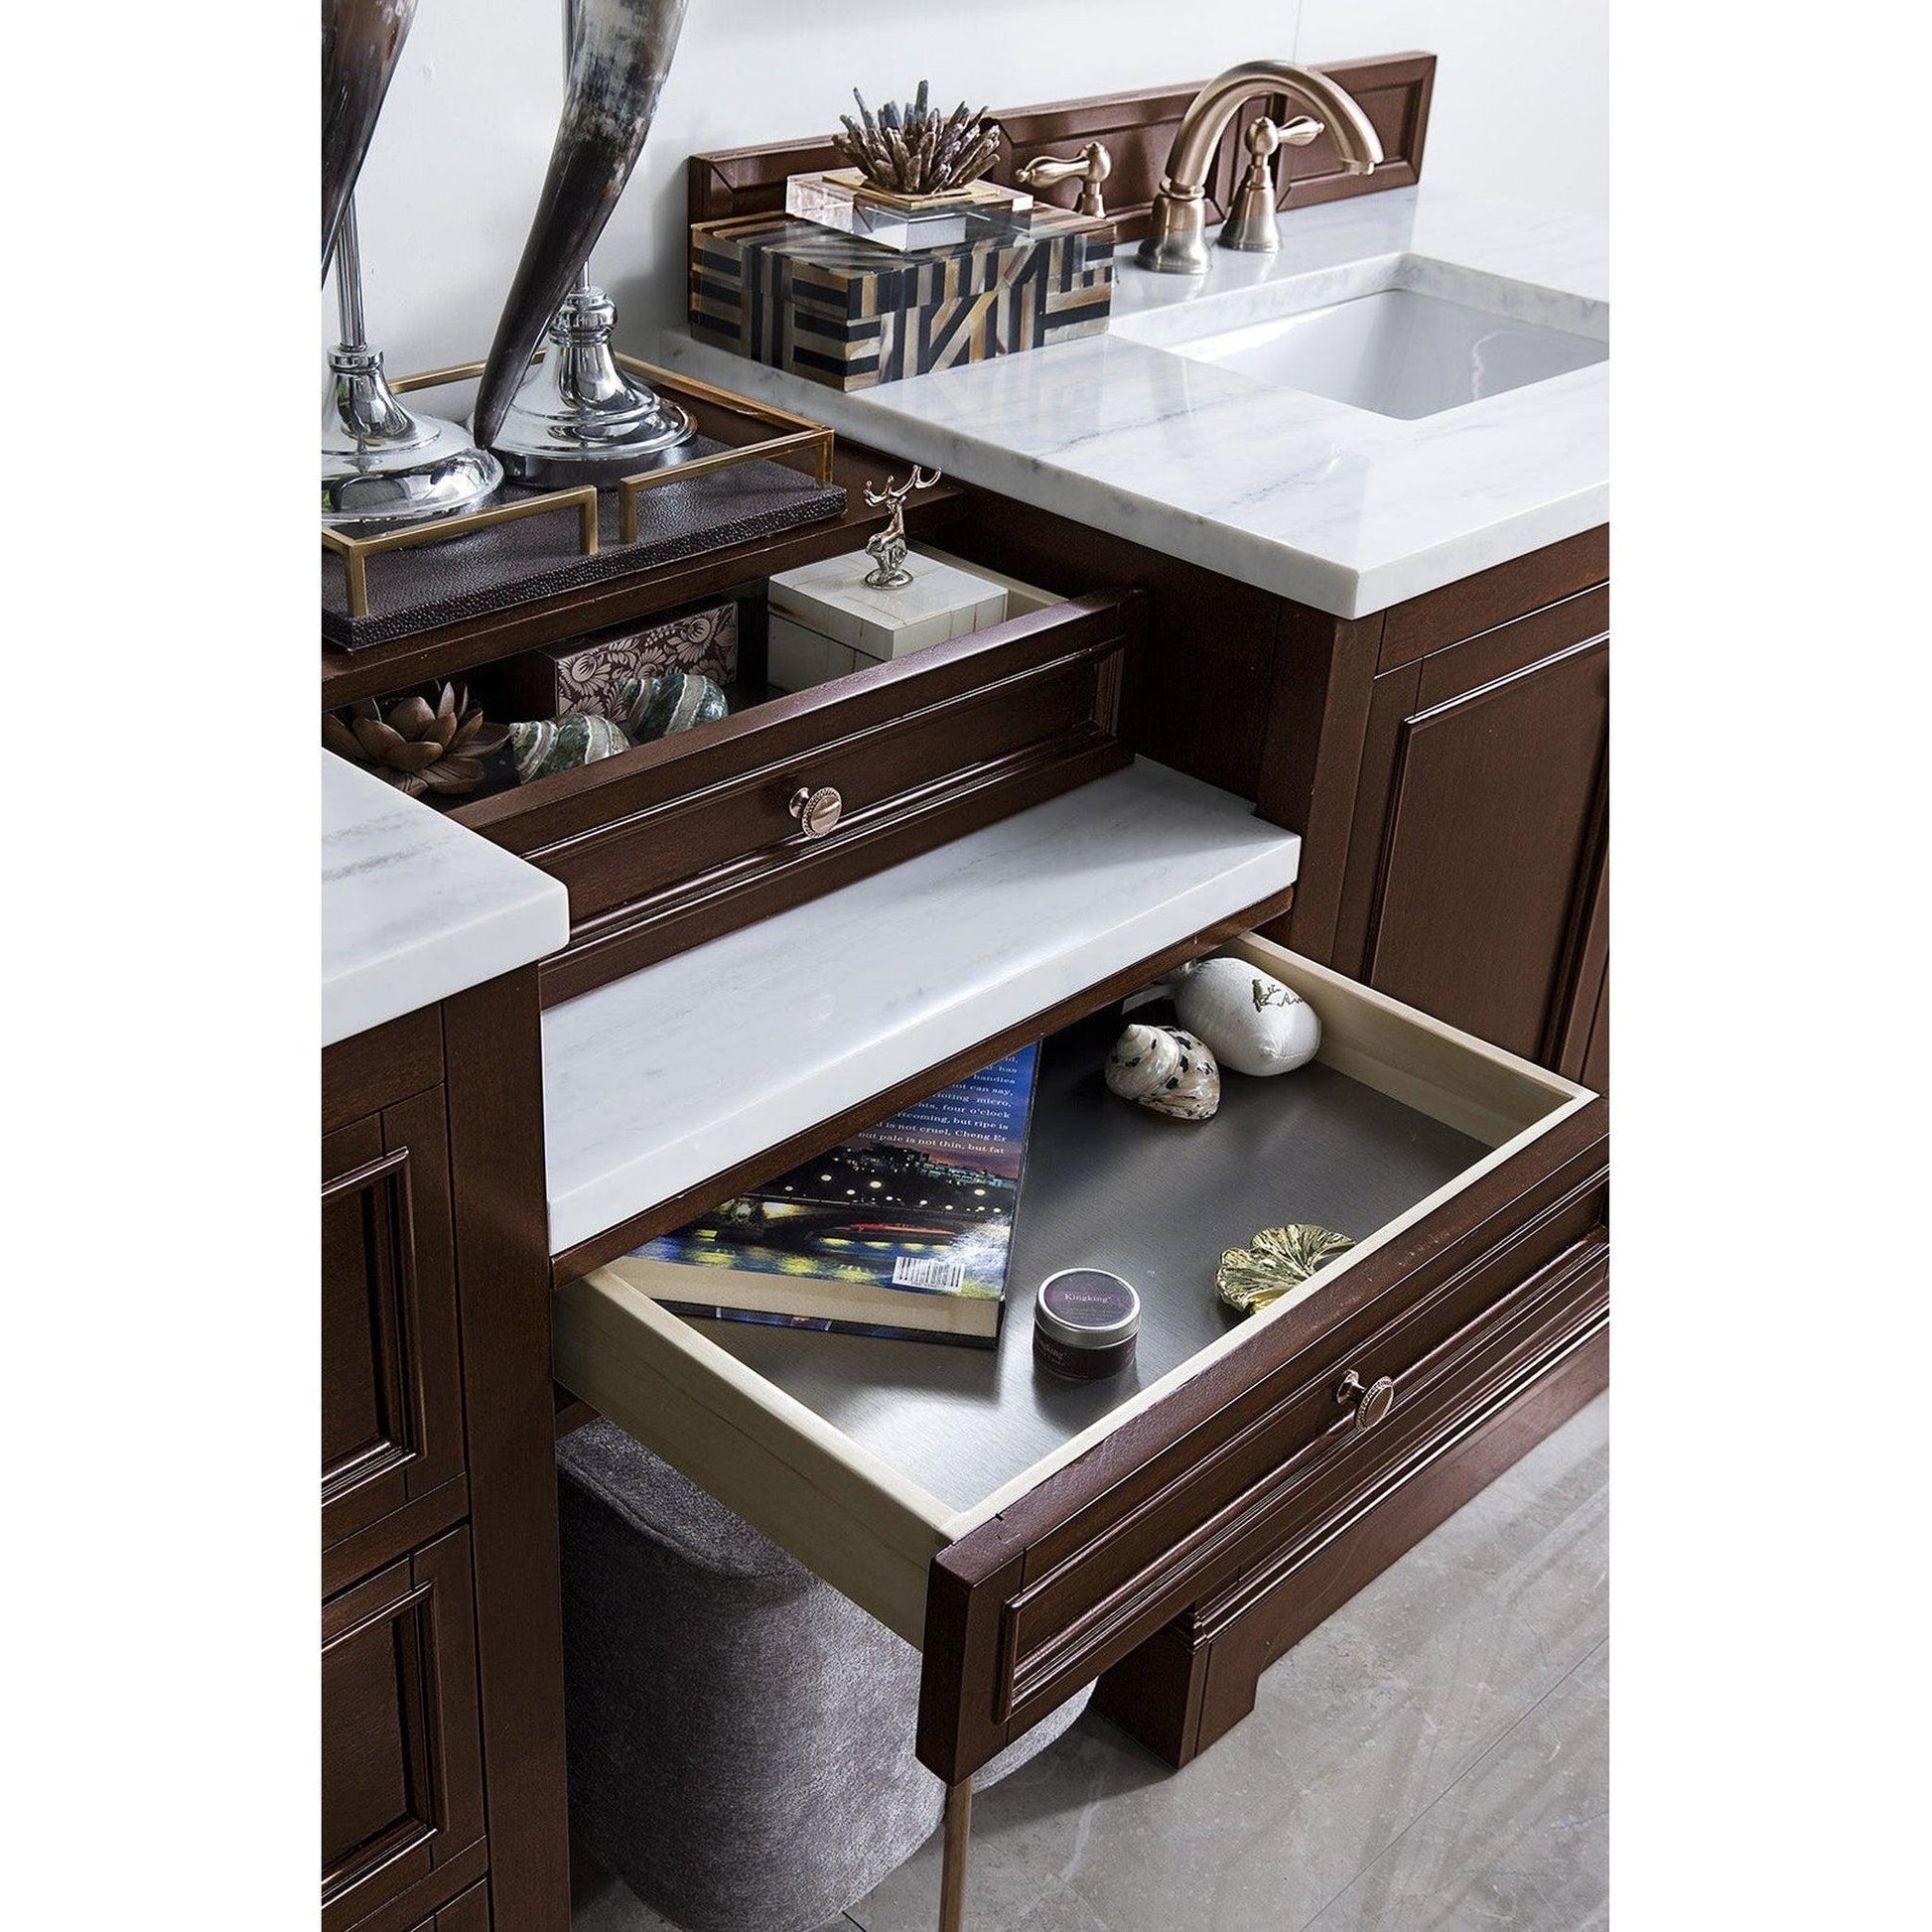 James Martin Vanities De Soto 94" Burnished Mahogany Double Vanity Set With Makeup Table, 3cm Arctic Fall Solid Surface Top